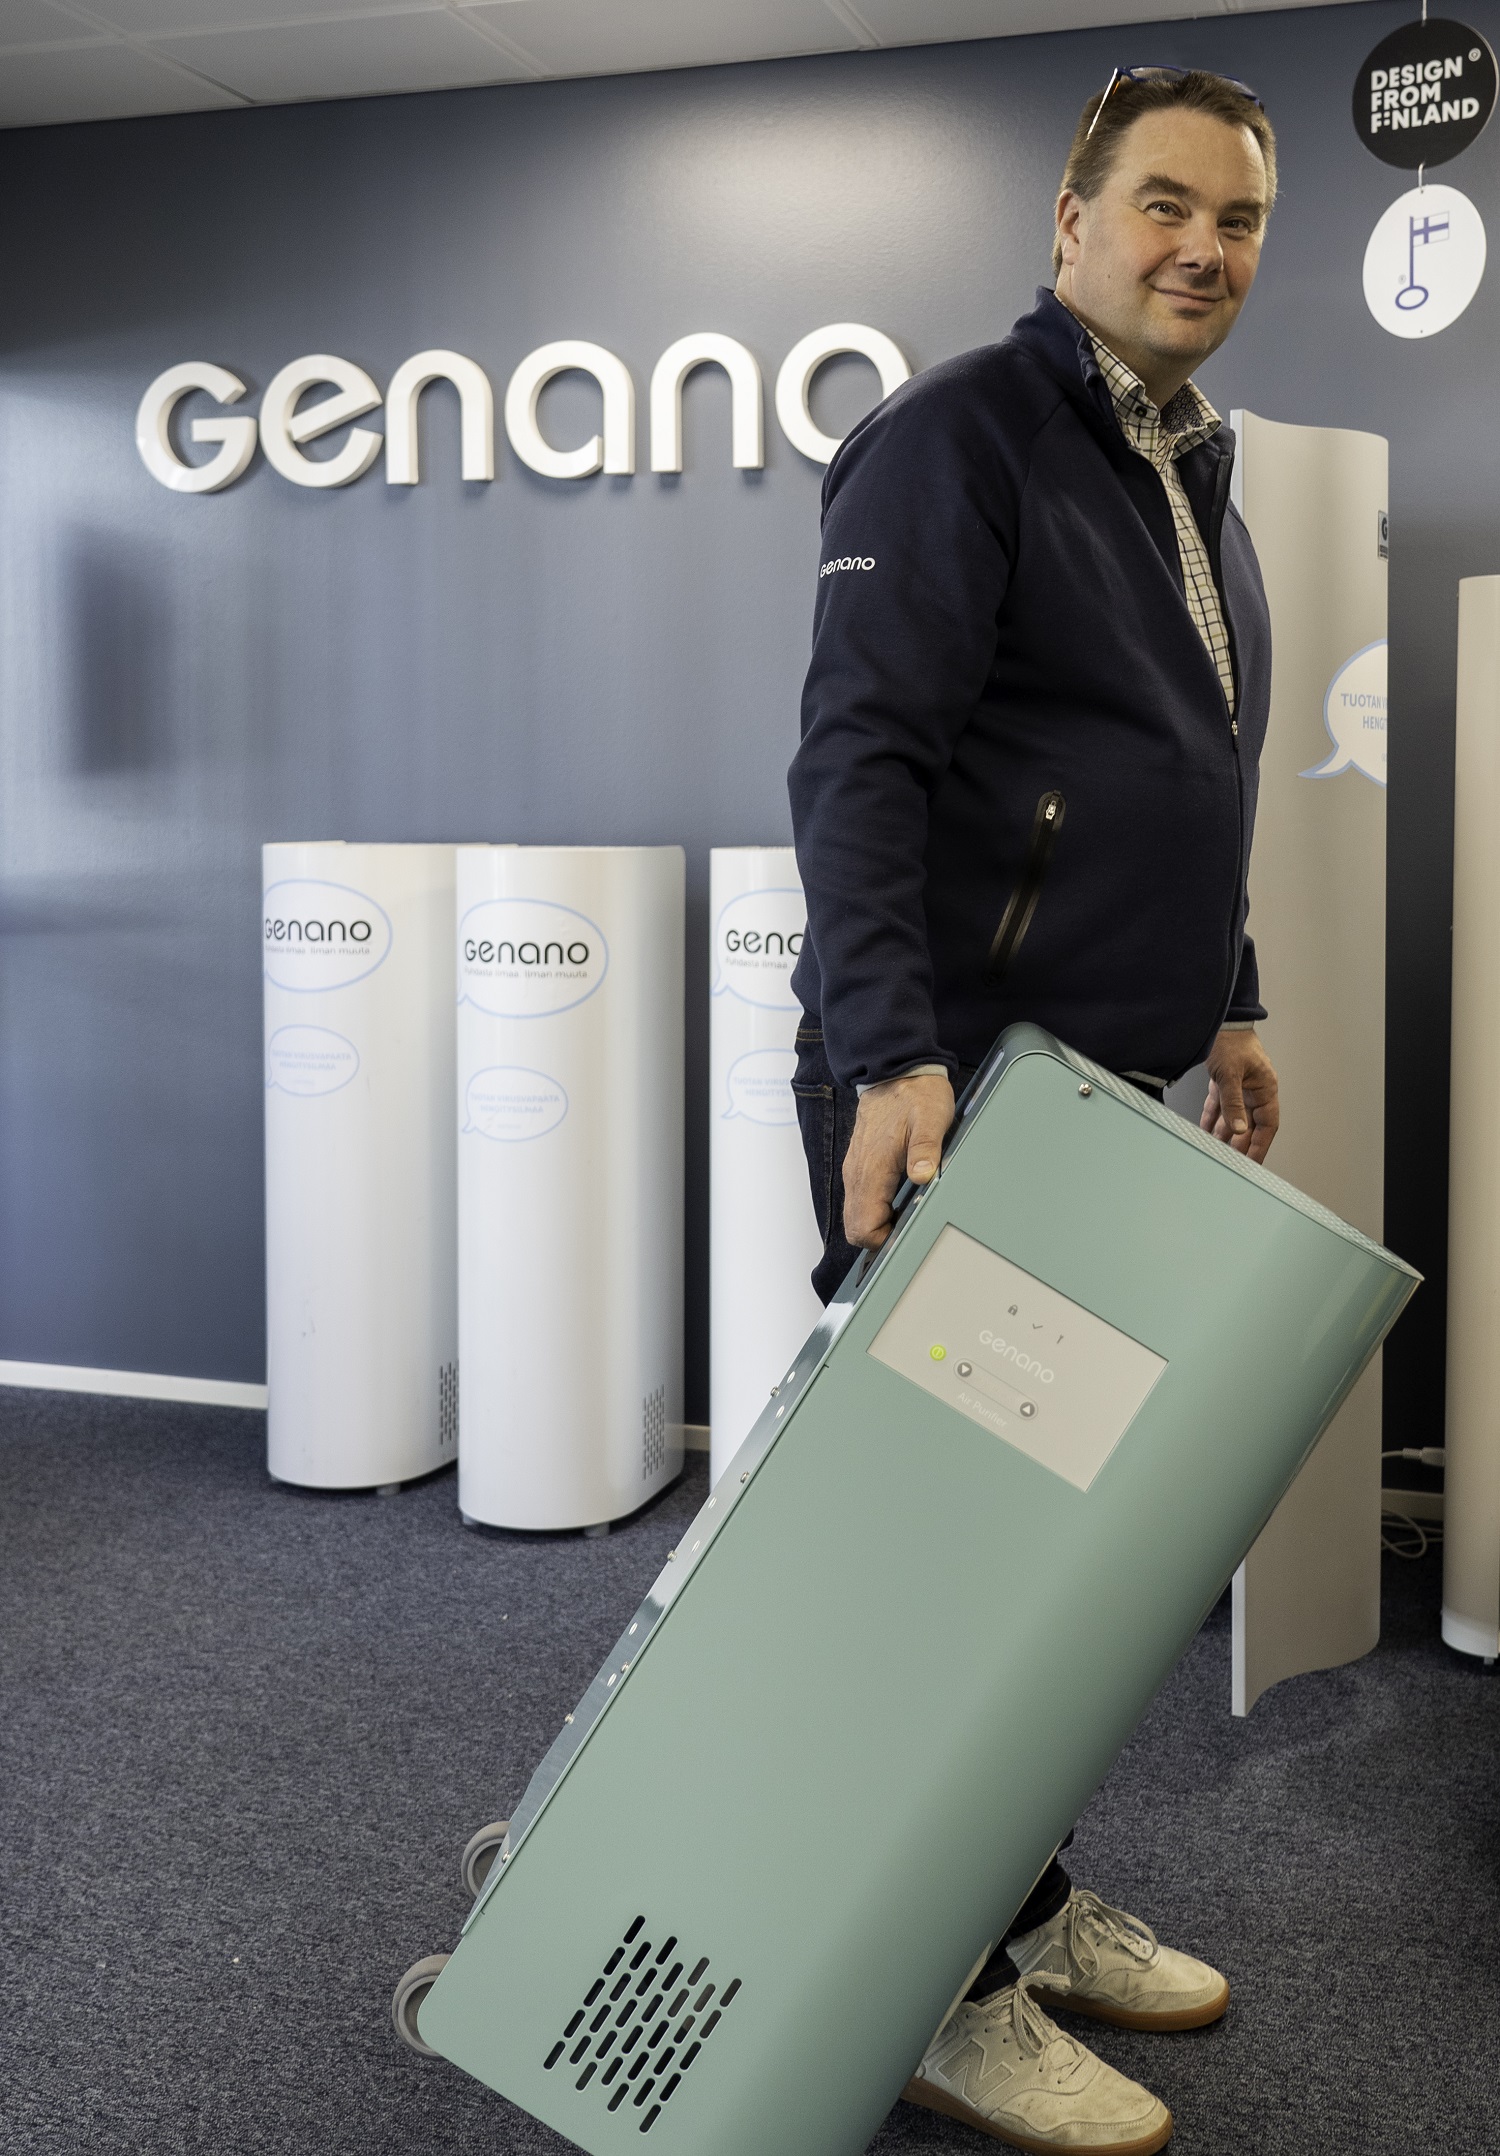 CEO Niklas Skogster, with the Genano 350 indoor air decontaminator which weighs only 17 kilos and has a small footprint.